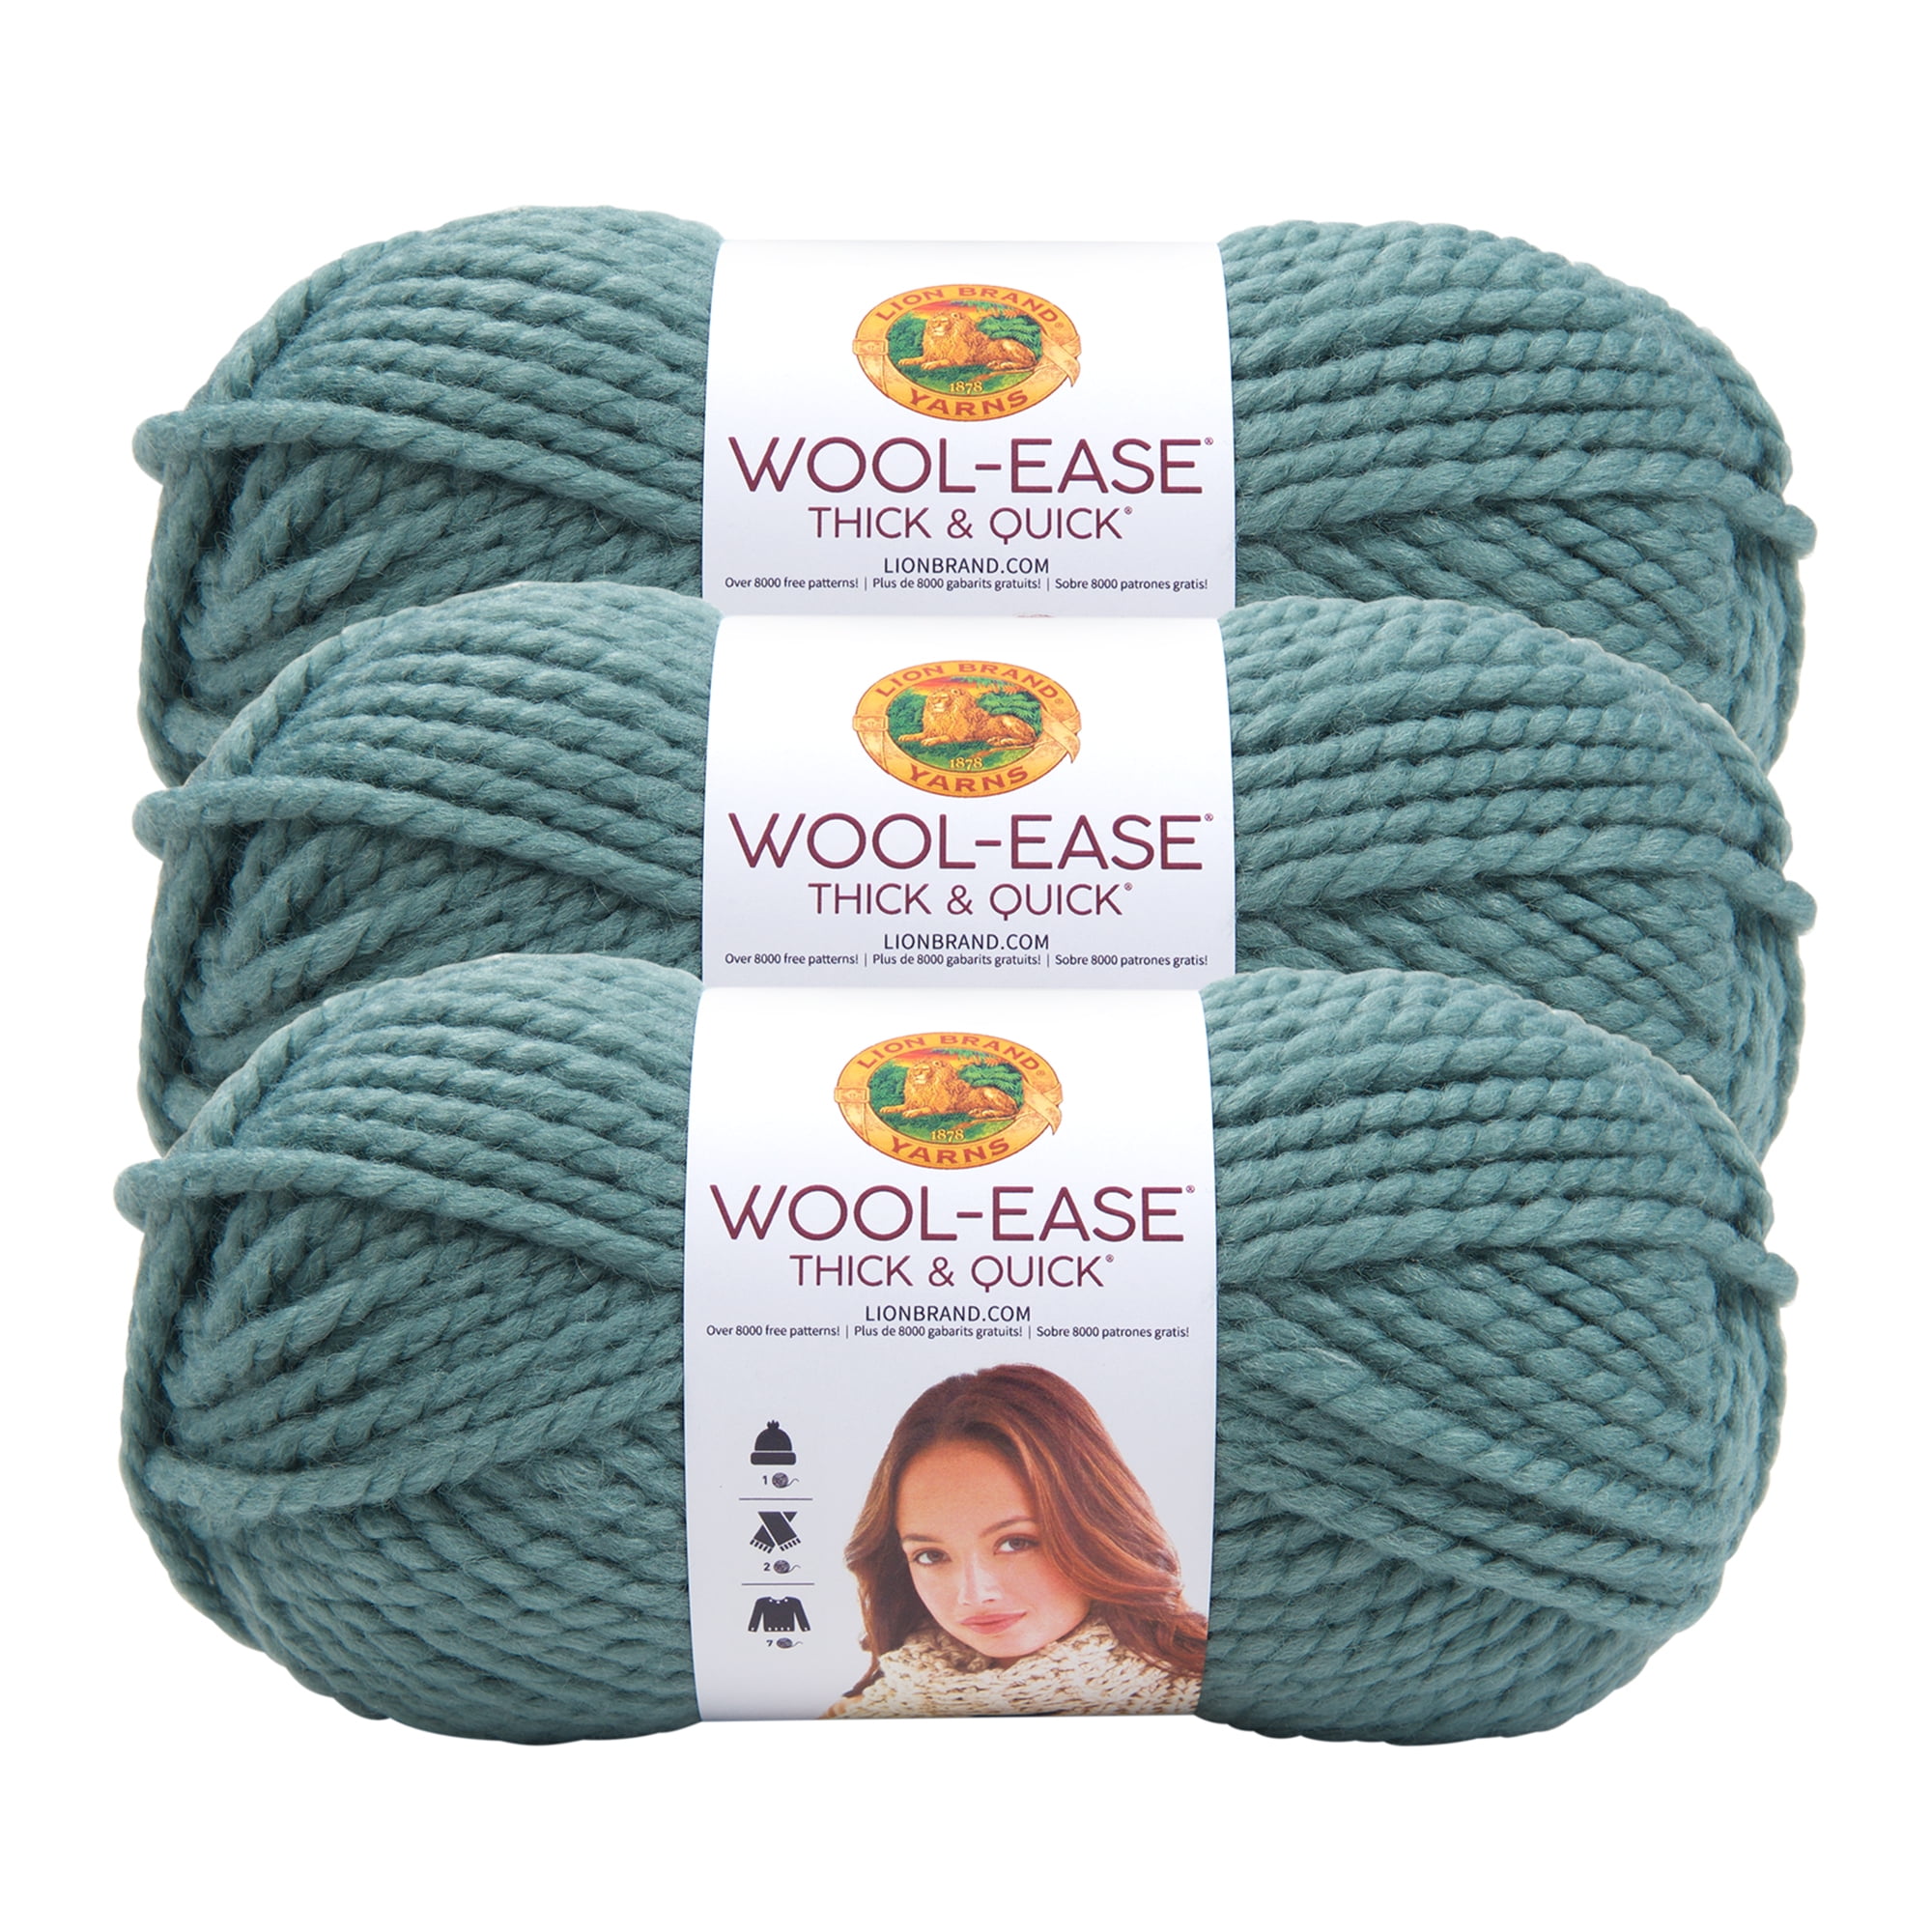 Lion Brand Wool-Ease Thick & Quick Yarn-Blossom, 1 count - Kroger